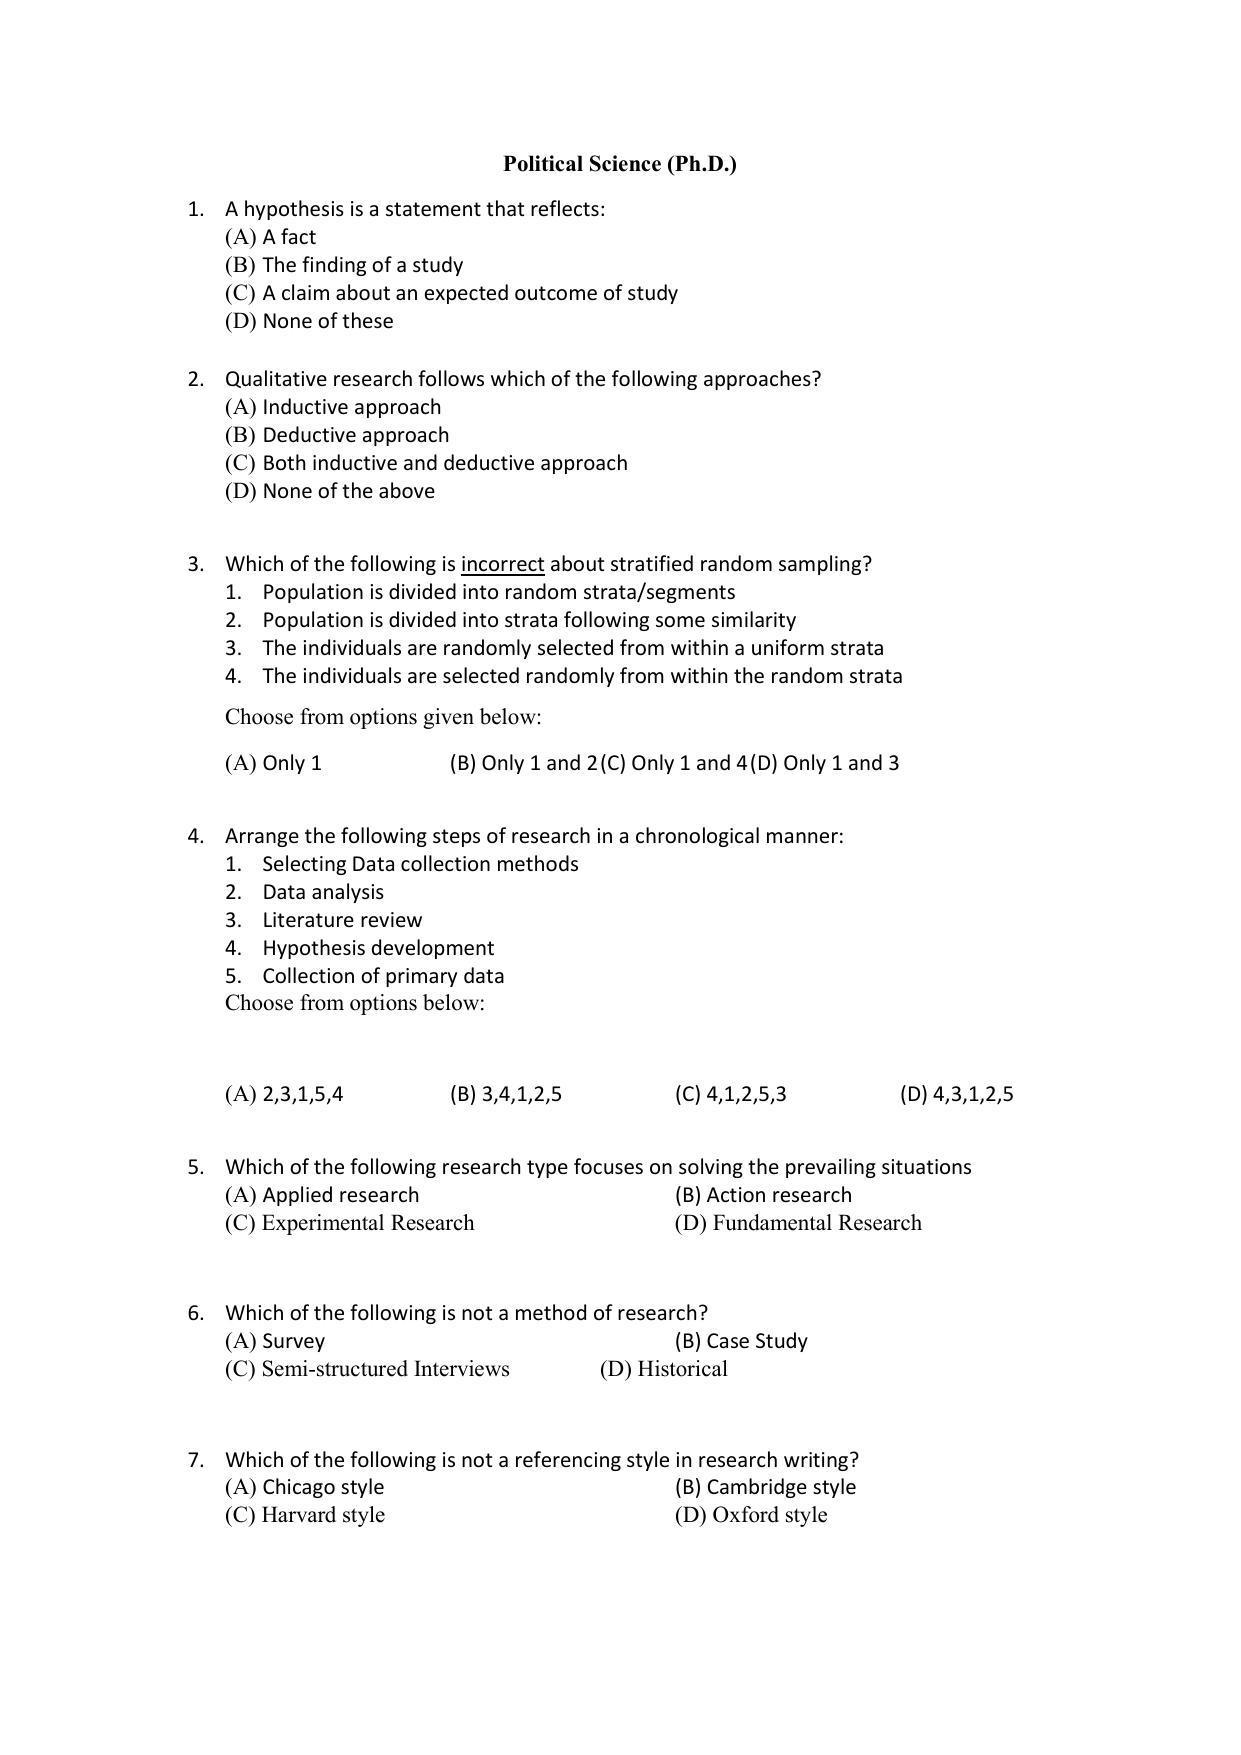 PU MPET Ancient Indian History & Archeology 2022 Question Papers - Page 26